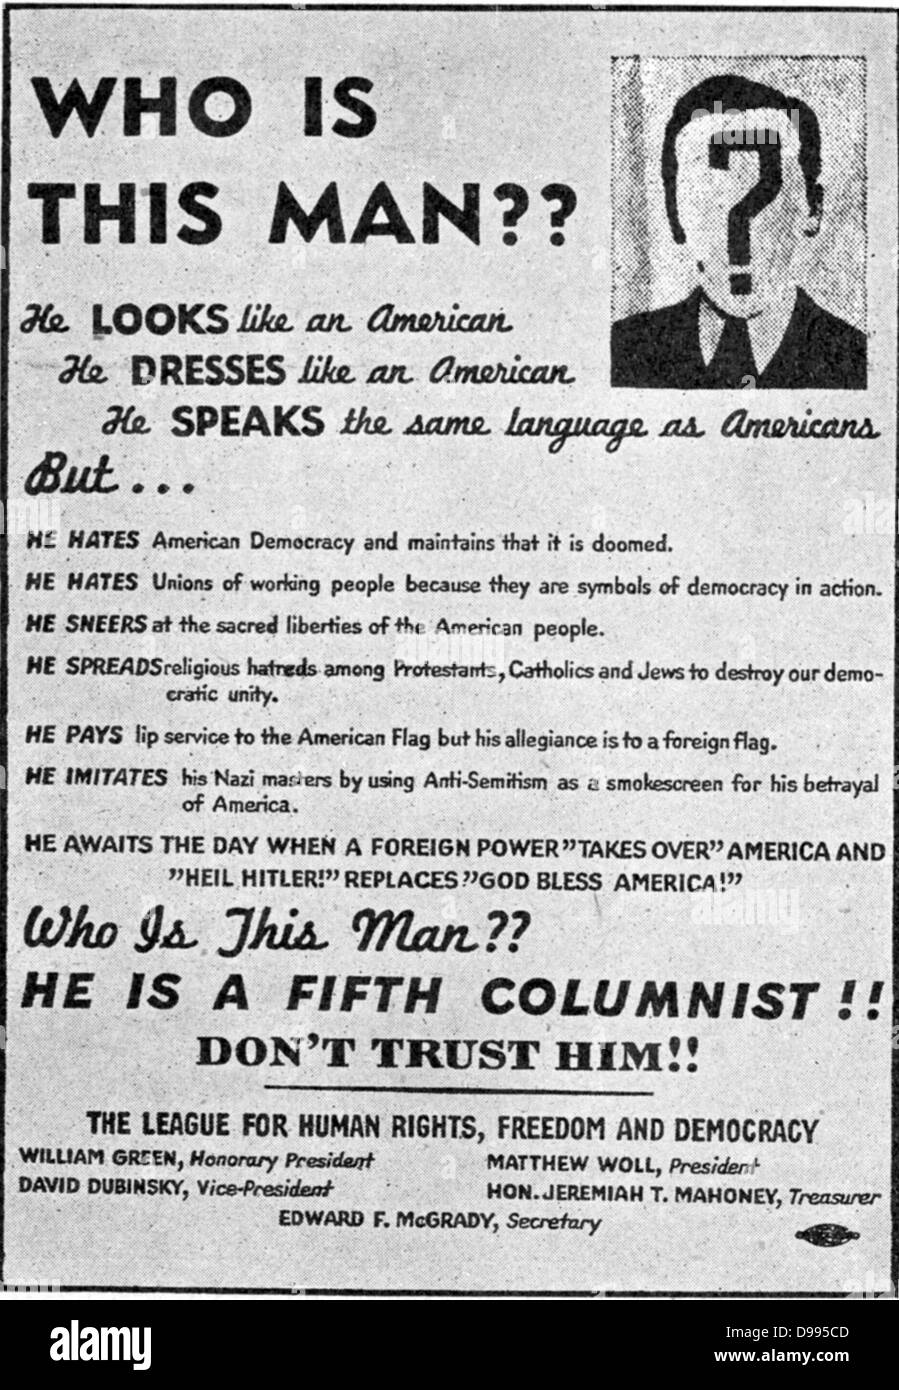 Anti-Nazi warning against fifth columinsts. Propaganda published in United States during the Second World War by the The League for Human Rights, Freedom and Democracy. Stock Photo